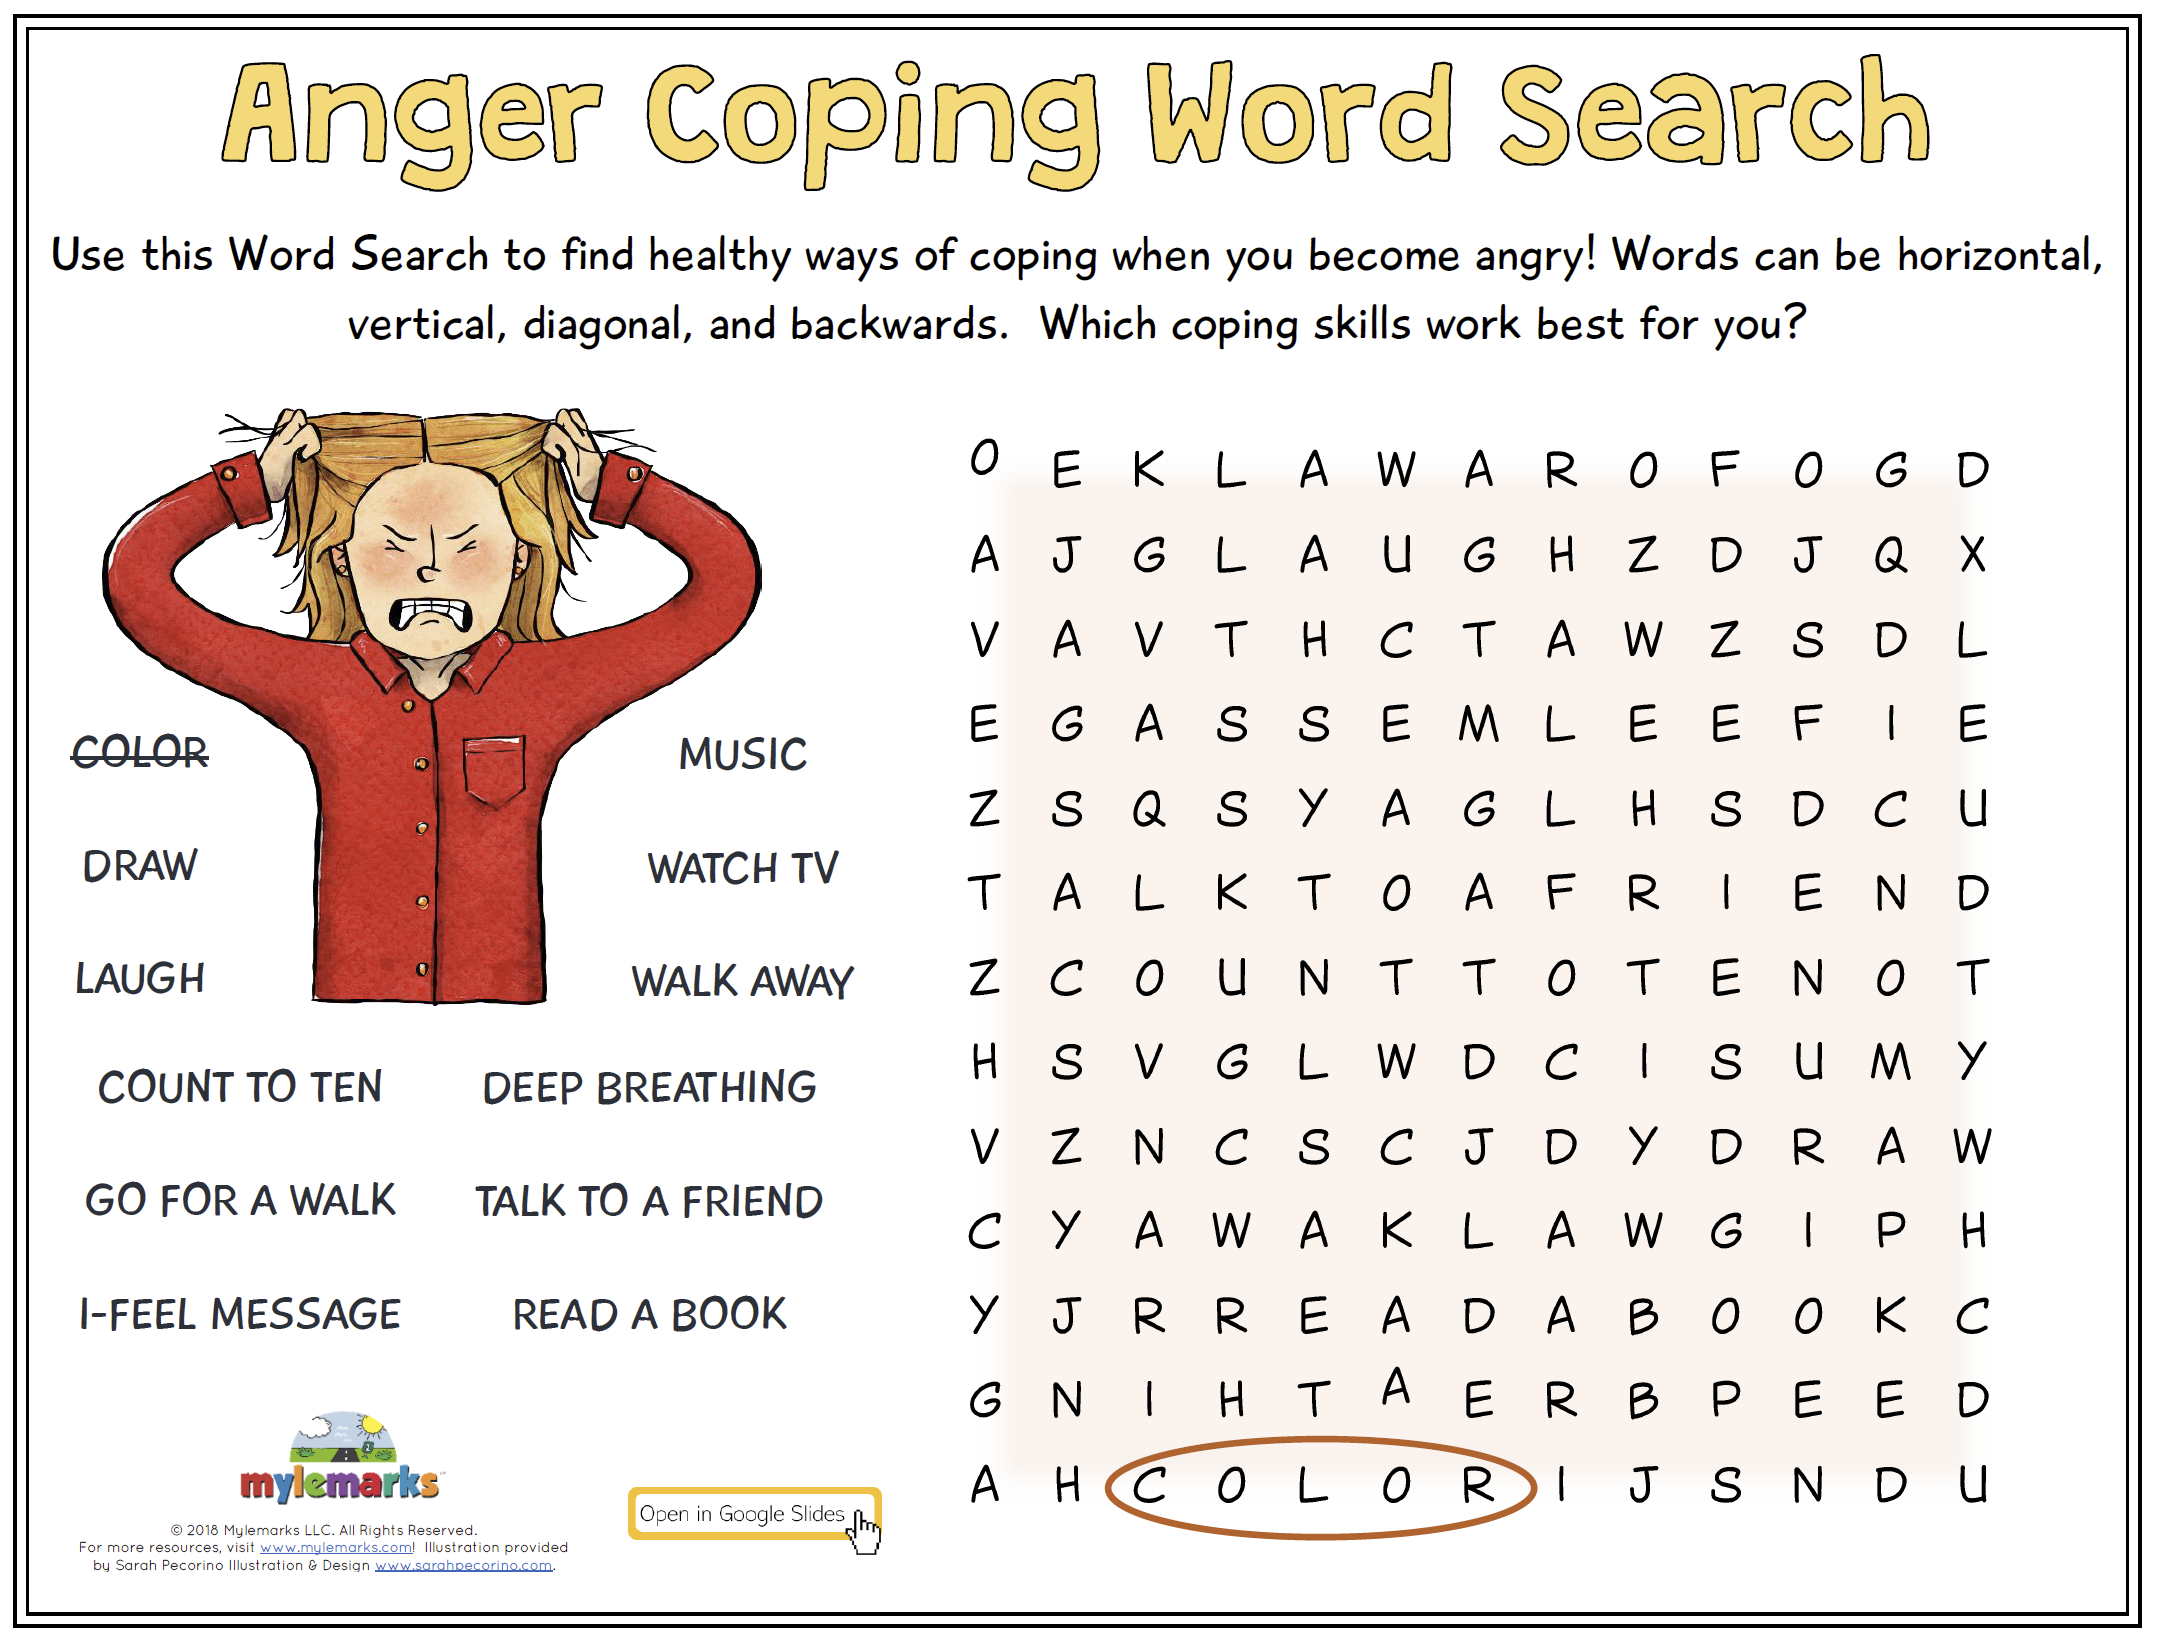 anger-coping-word-search-gs